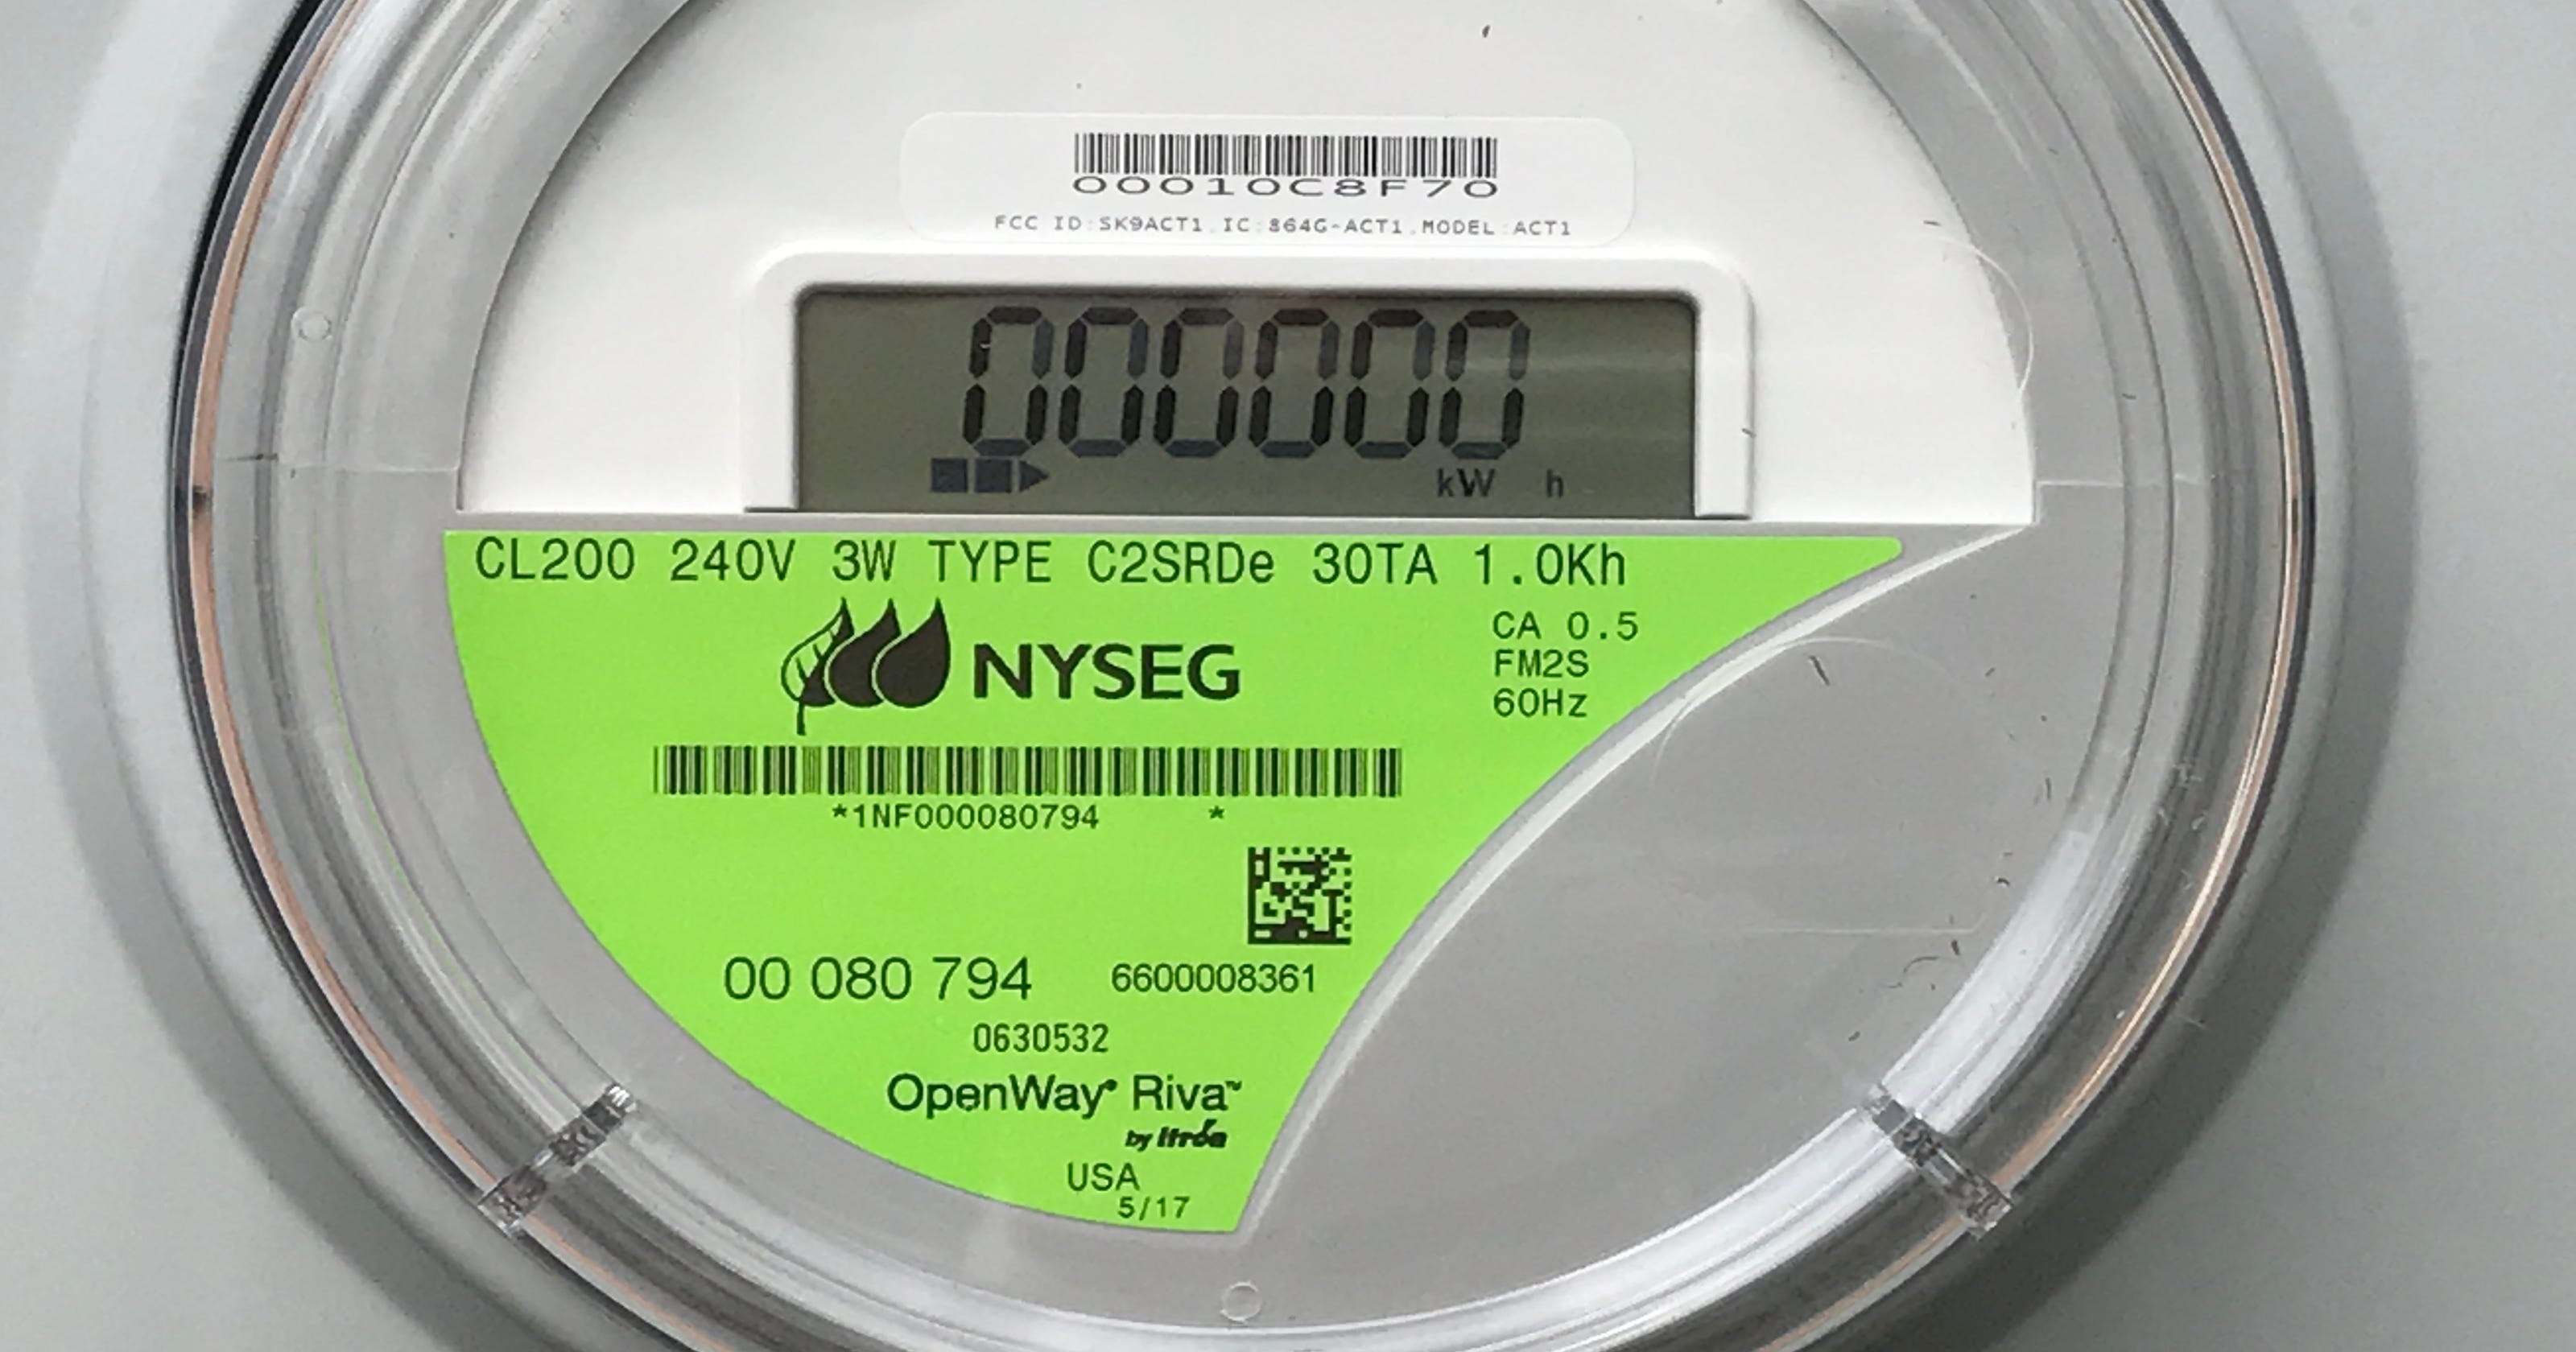 nyseg-s-new-meters-here-s-what-you-need-to-know